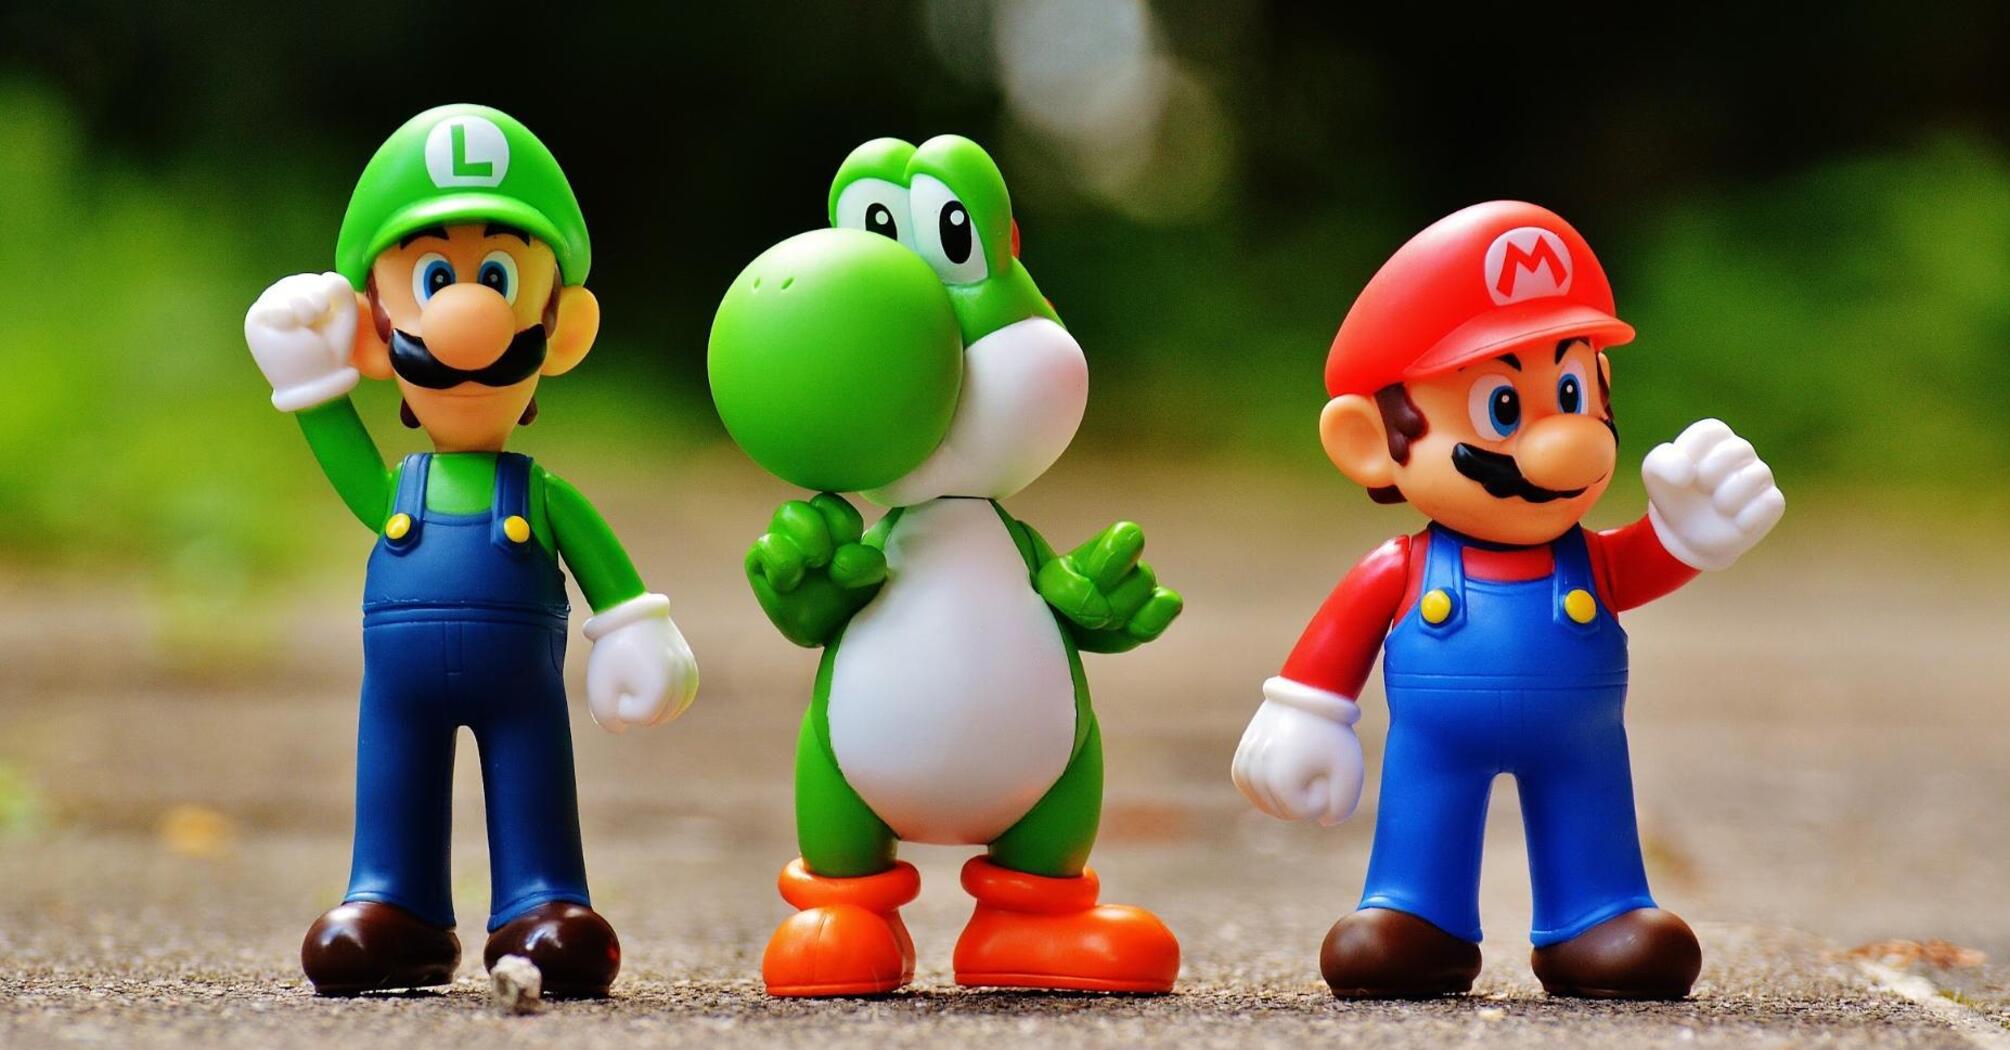 Three toys from the Mario game